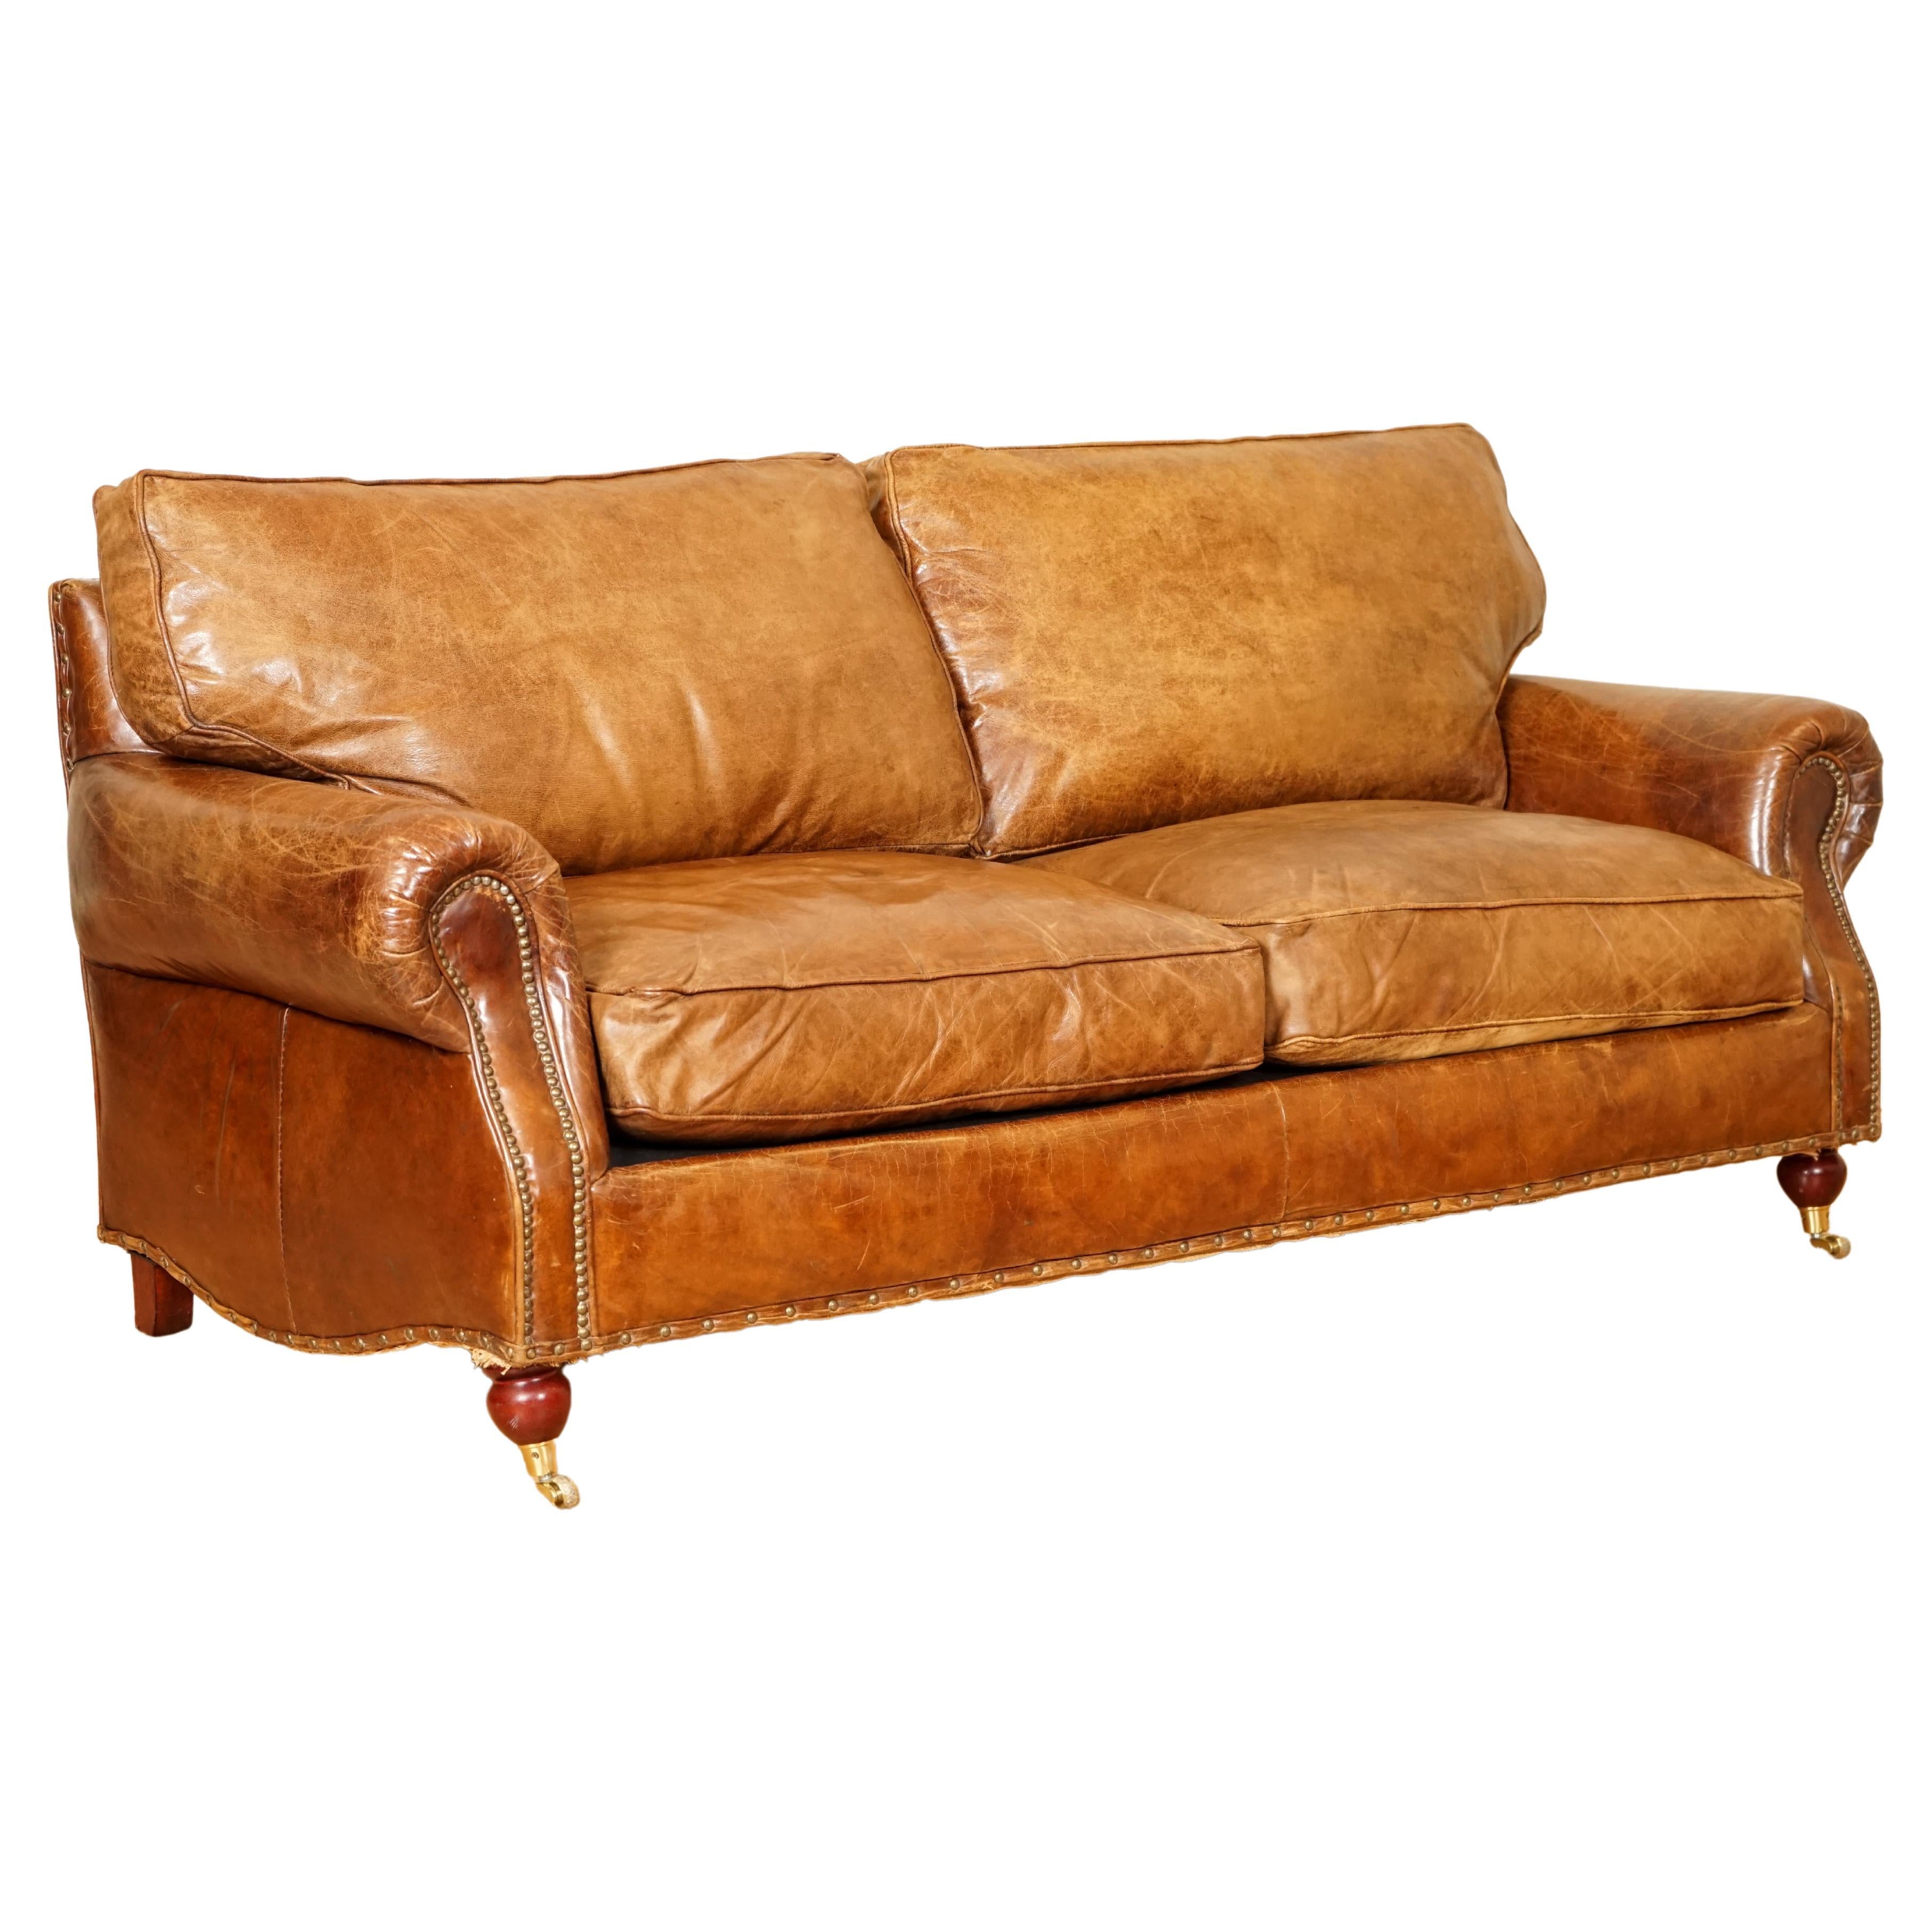 Feather Filled Halo Timothy Oulton Balmoral 3 Seater Heritage Brown Leather Sofa